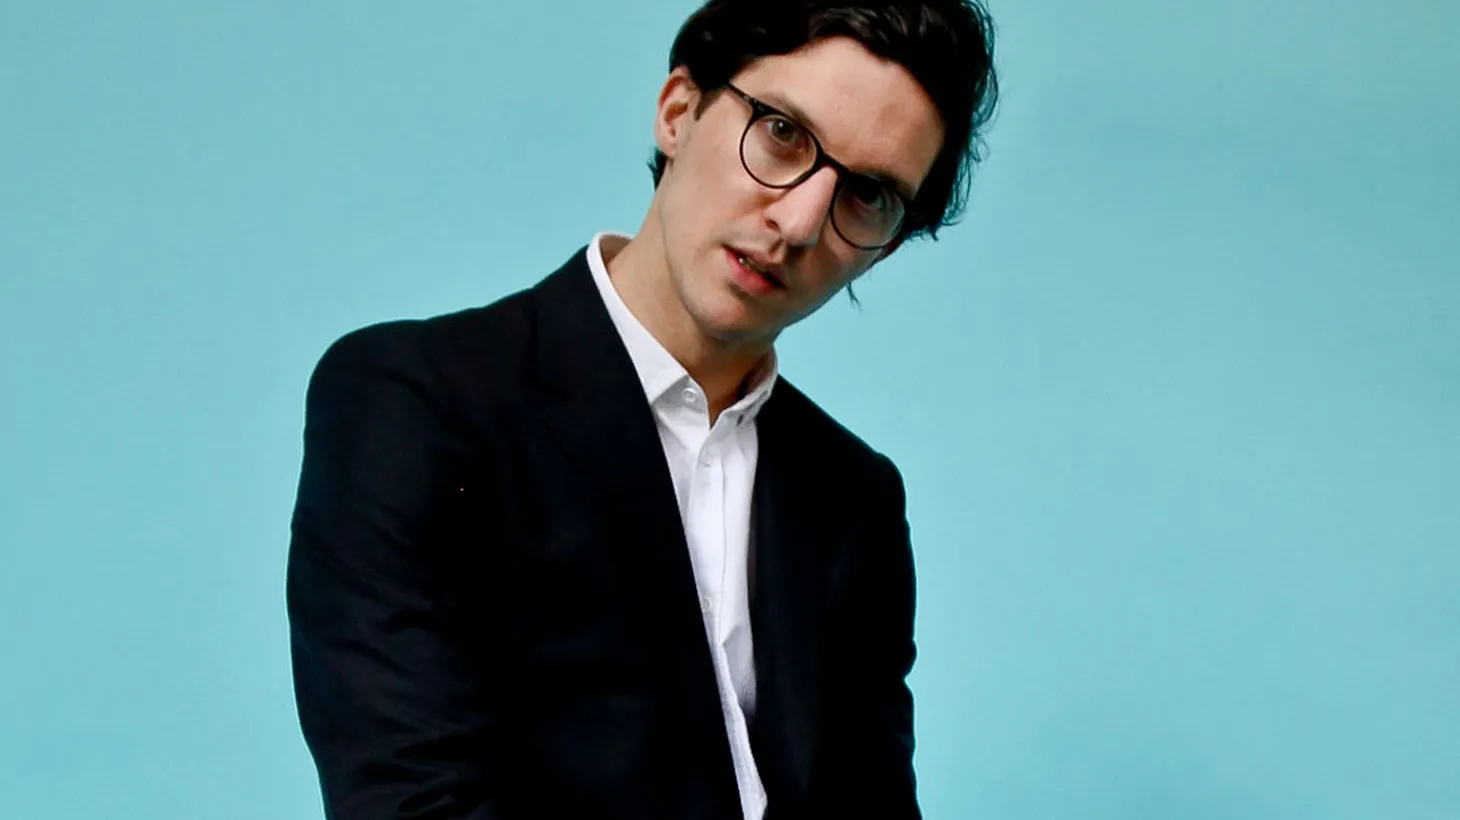 Liverpool native Dan Croll expertly crafts smart, catchy indie pop. His sophomore release Emerging Adulthood is a triumph.